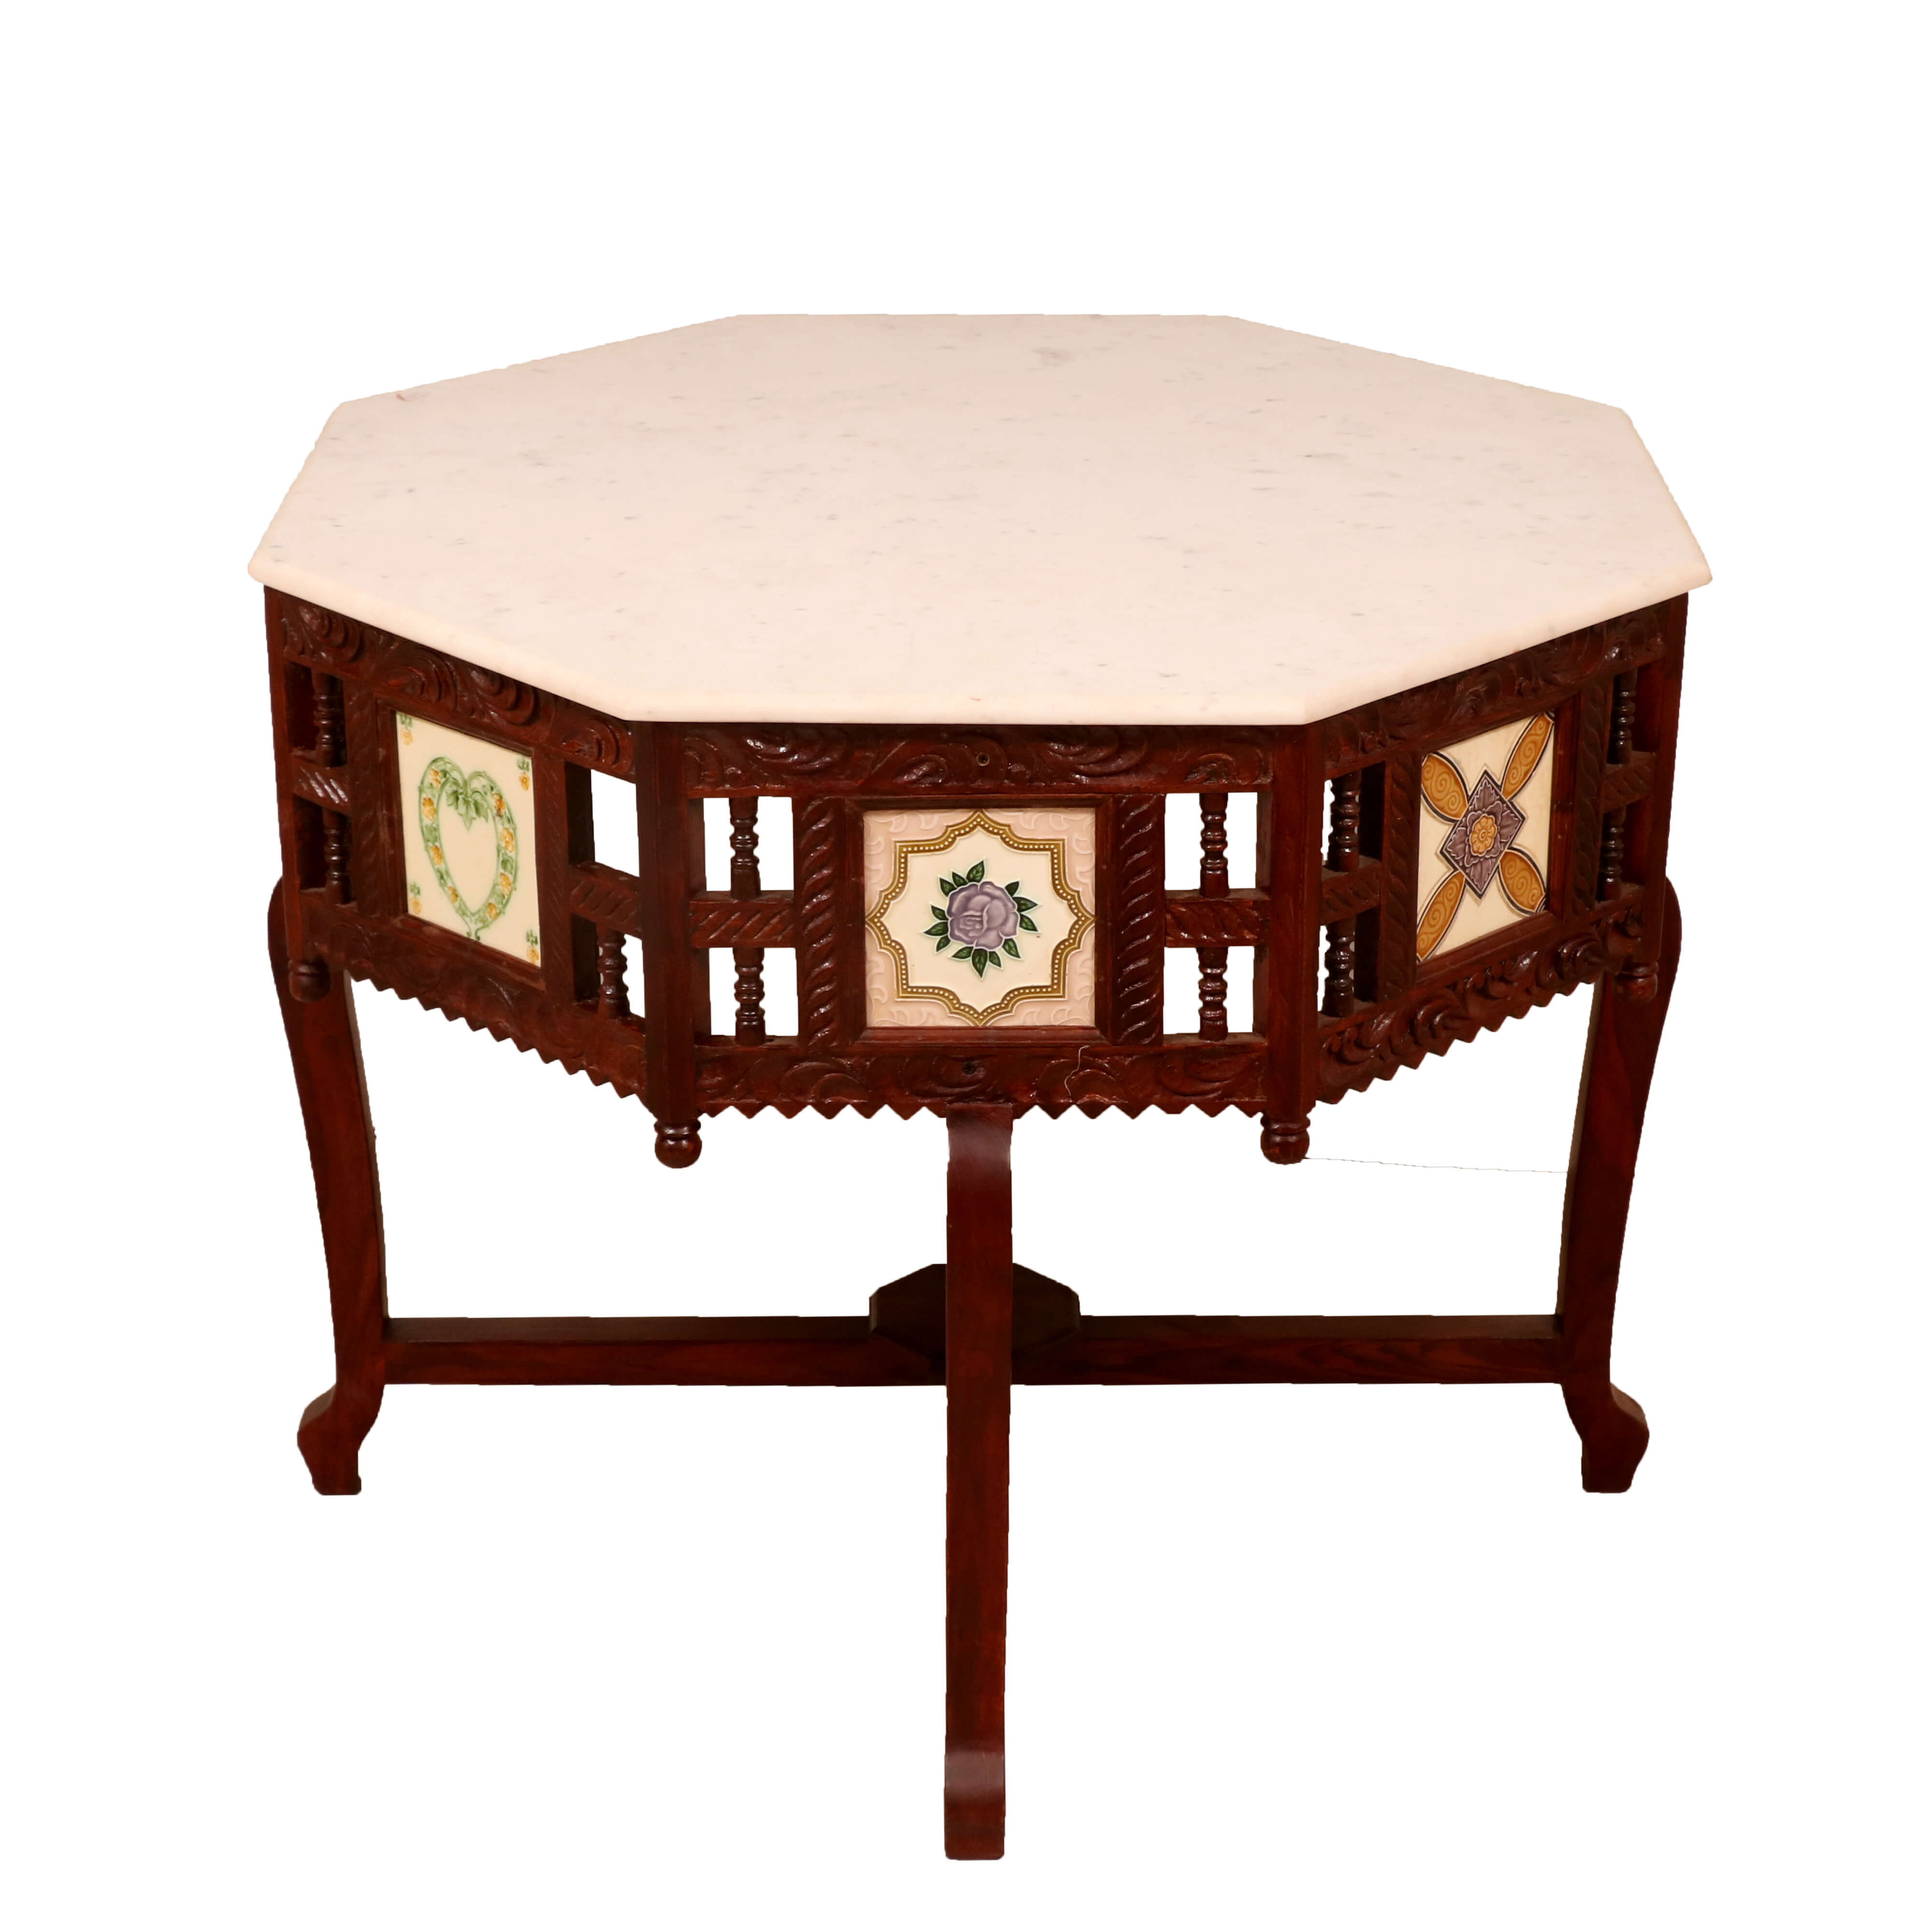 White Round Table End Table